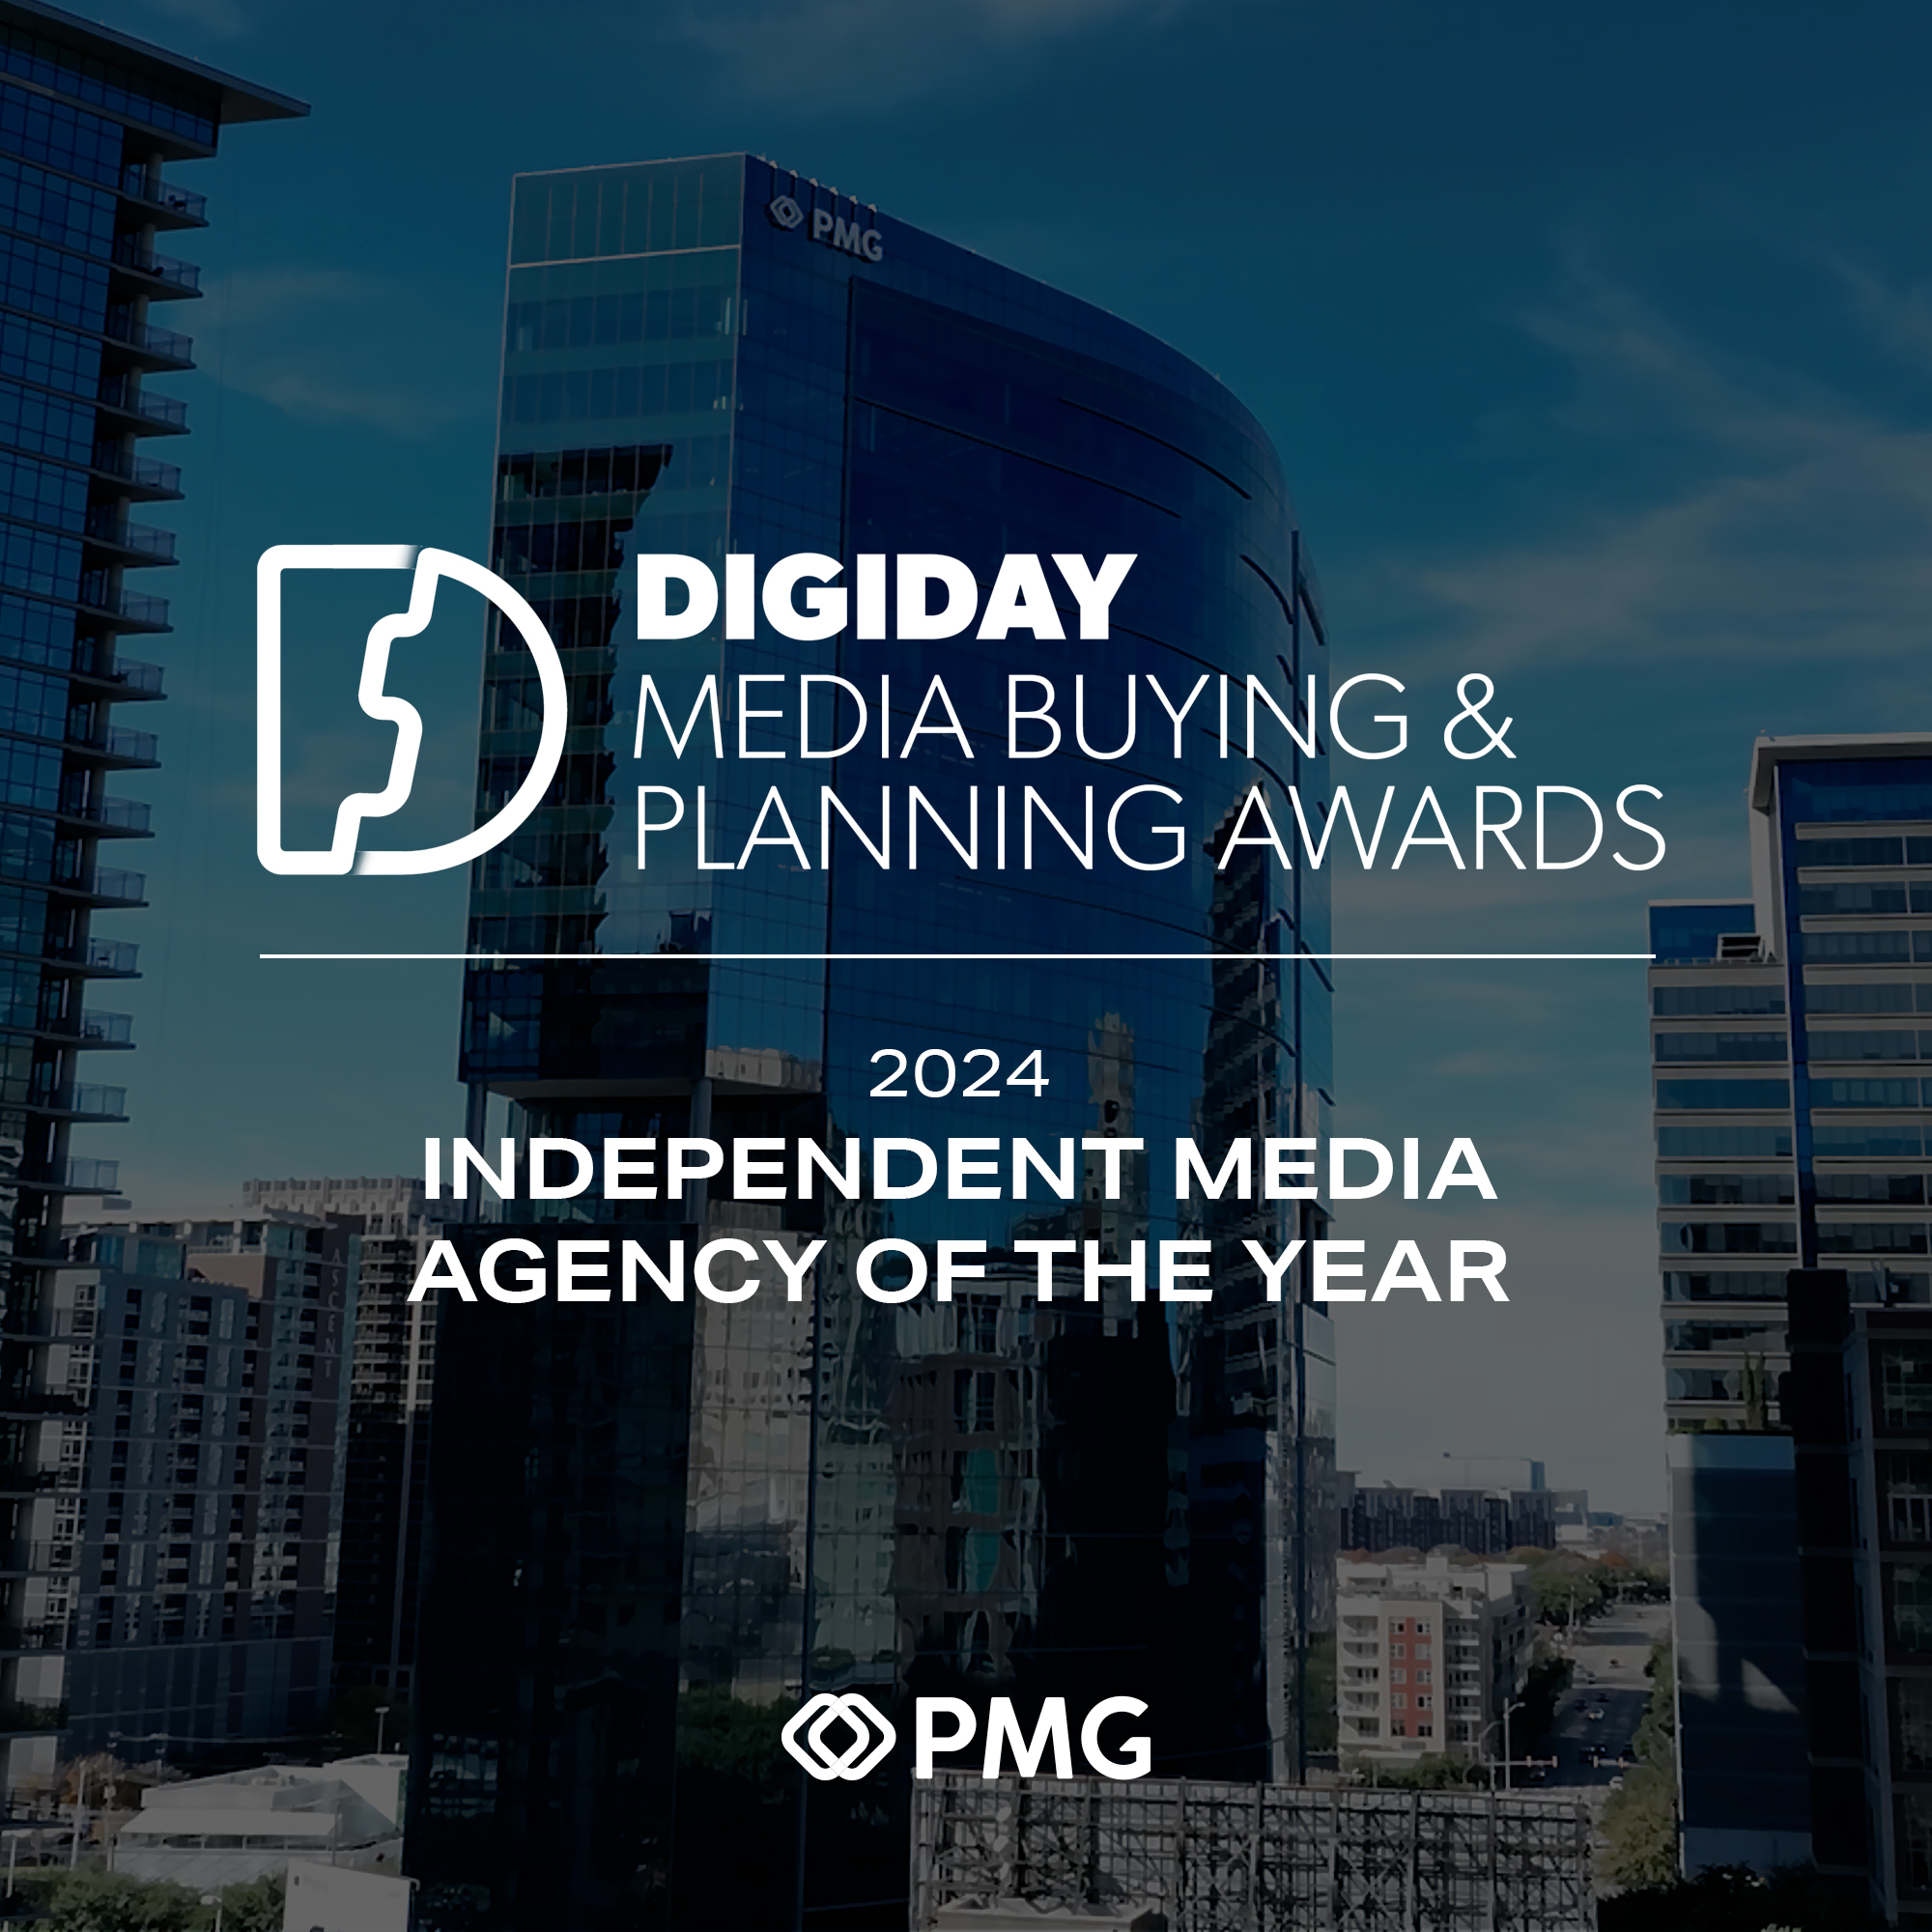 PMG Named Digiday Independent Media Agency of the Year